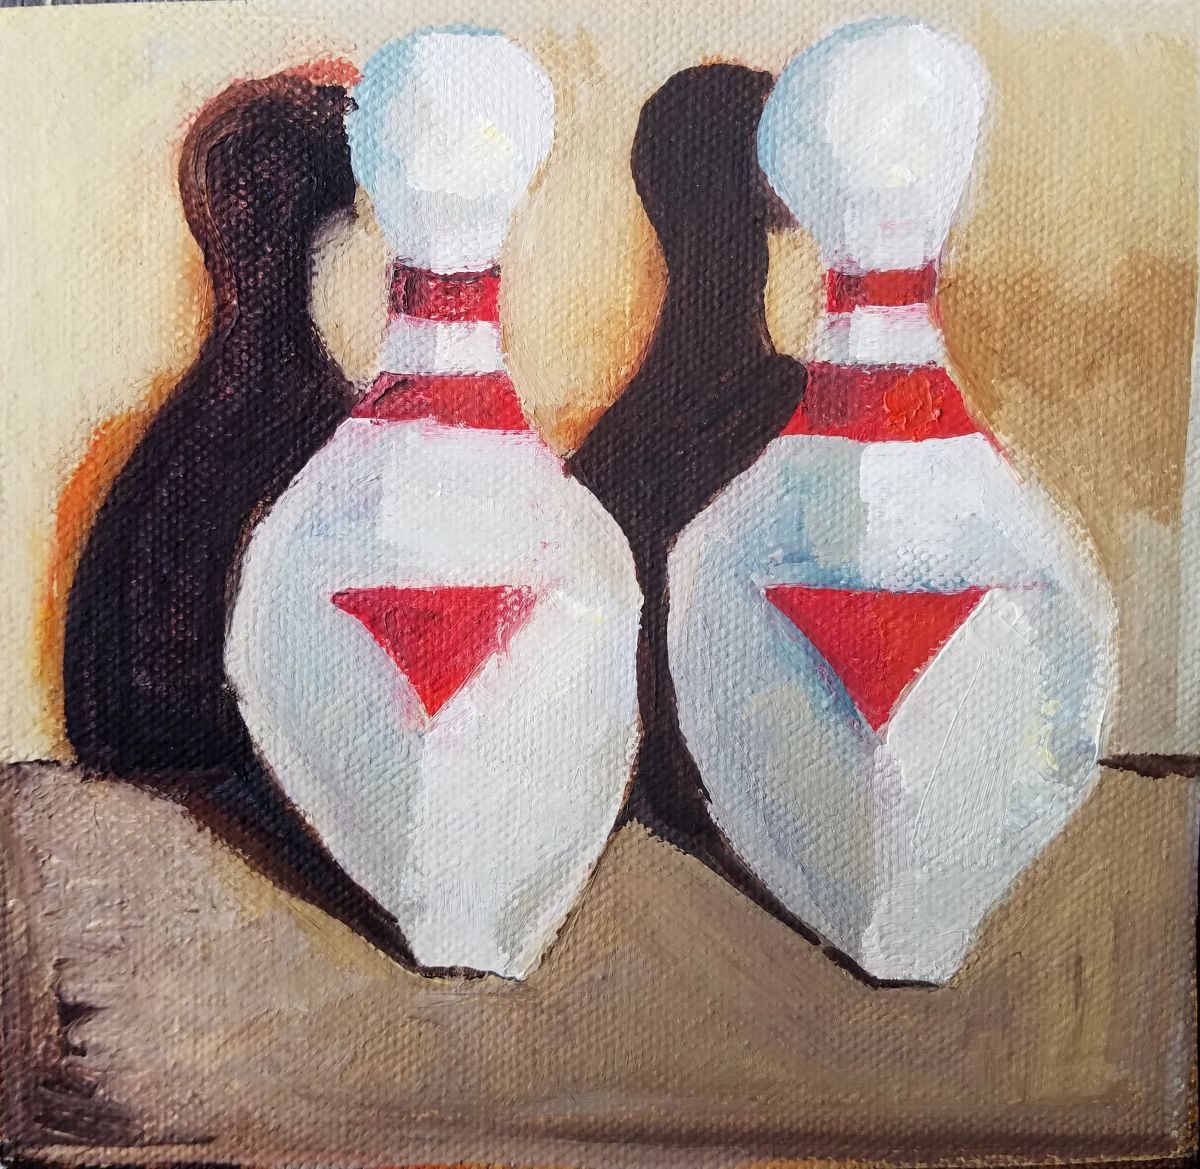 Still life with Bowling Pins by Shelton Walsmith